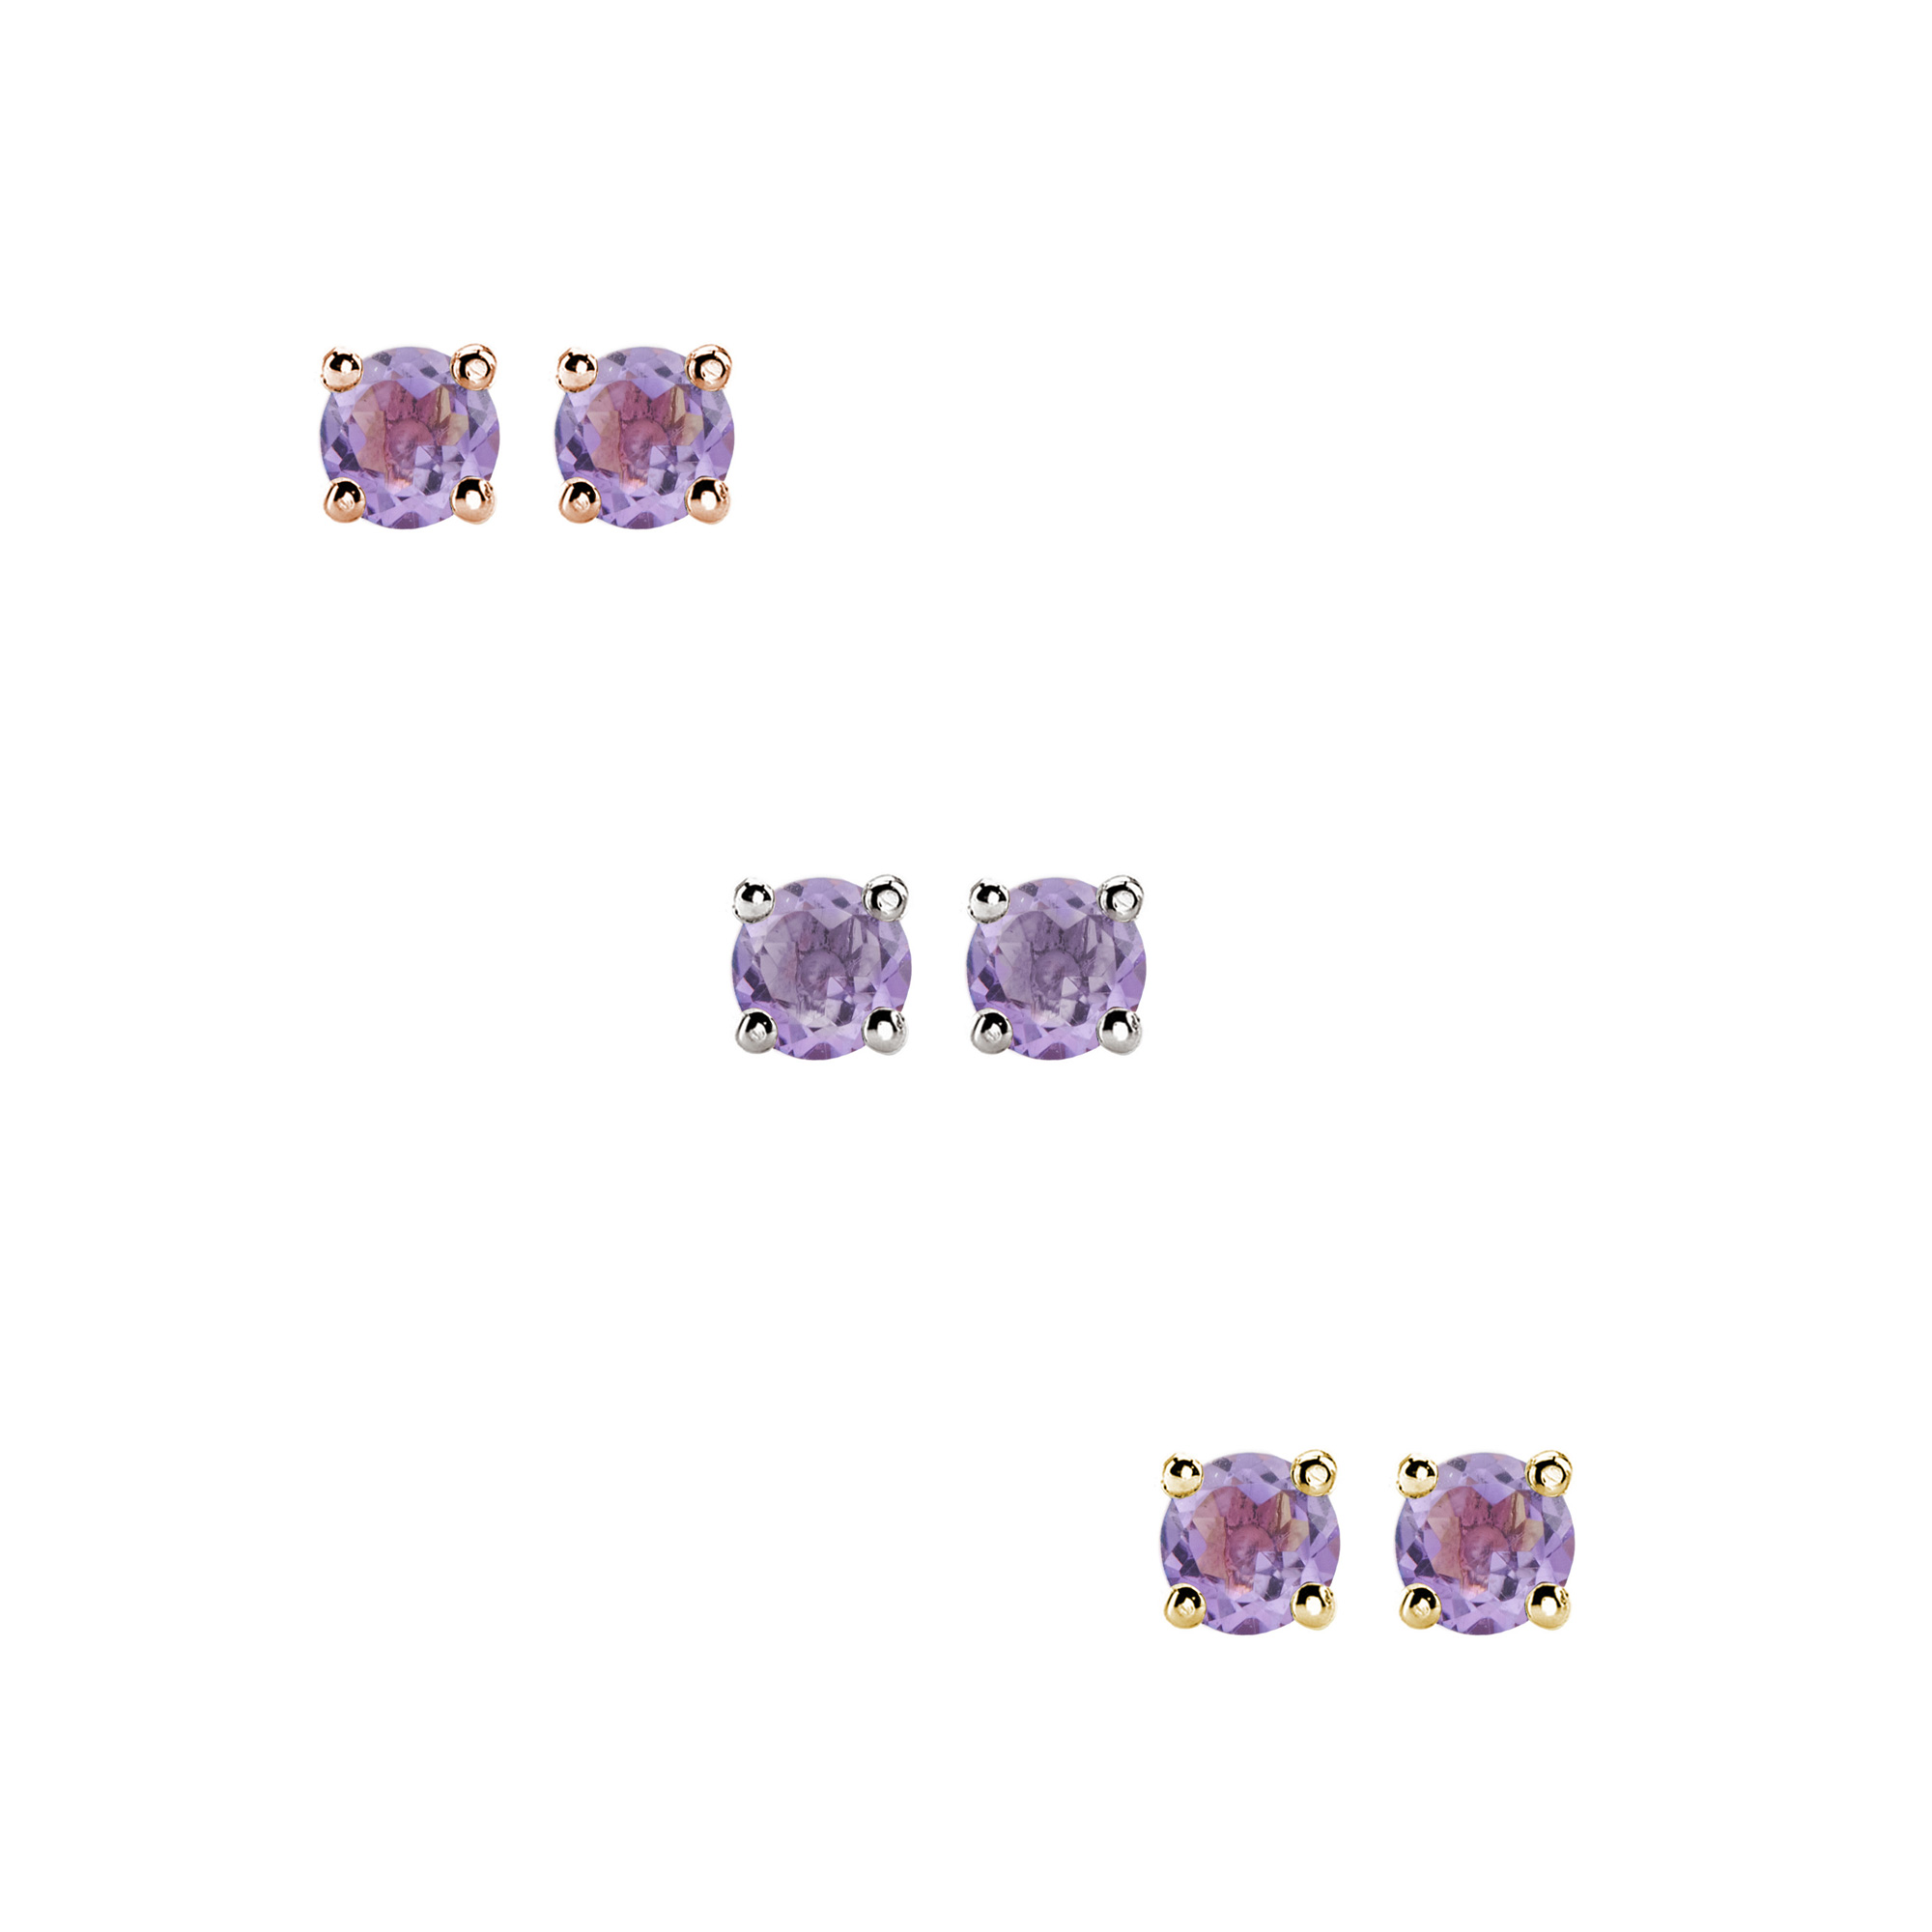 Buy Ravishing Impressions 925 Sterling Silver Round Amethyst Stud Earrings  Wedding Jewelry Anniversary Birthday Gifts For Women at Amazon.in